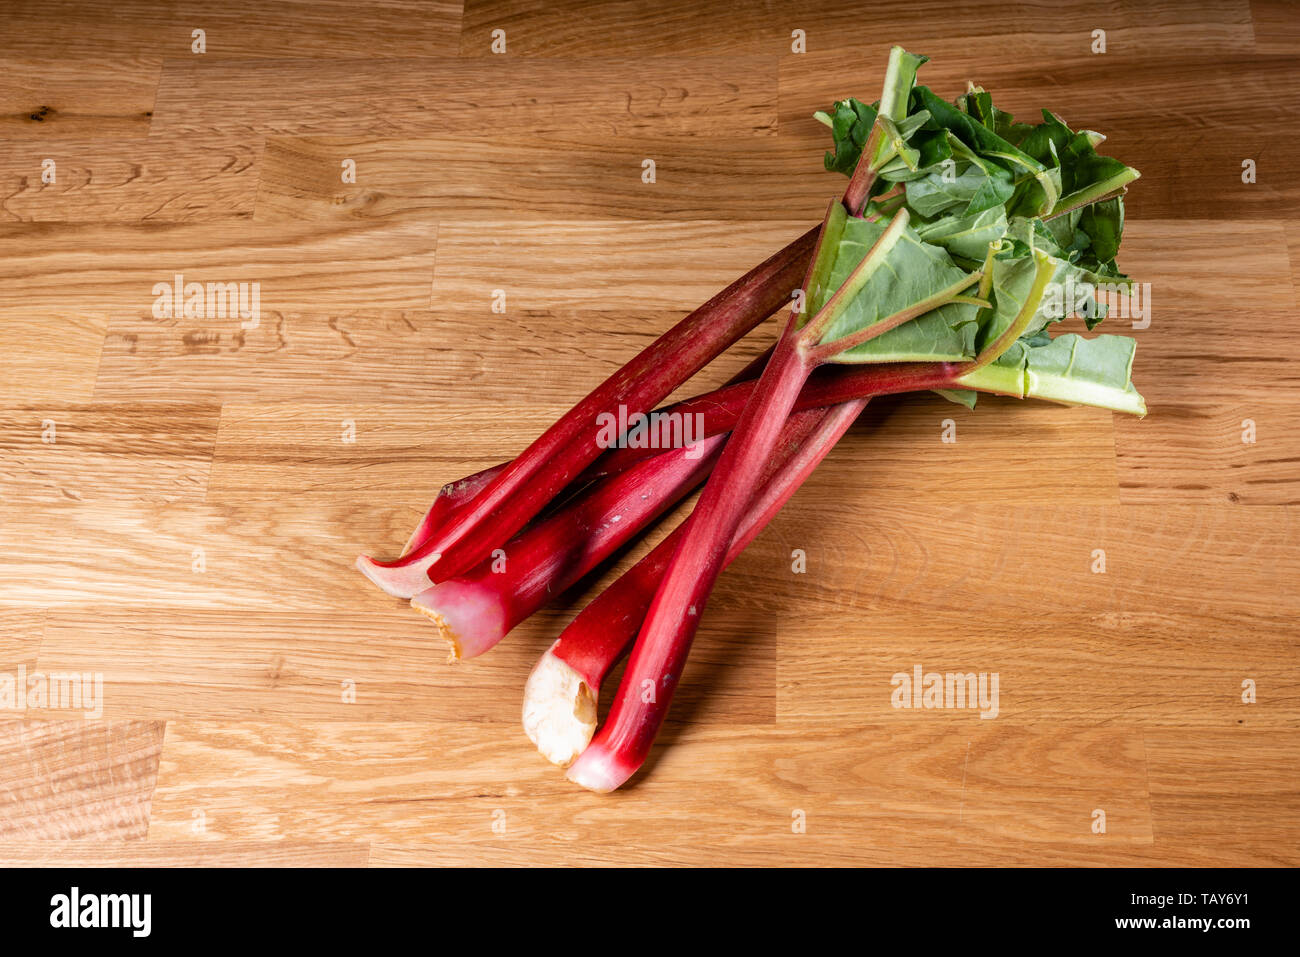 Fresh red rhubarb stalks on a wooden table Stock Photo